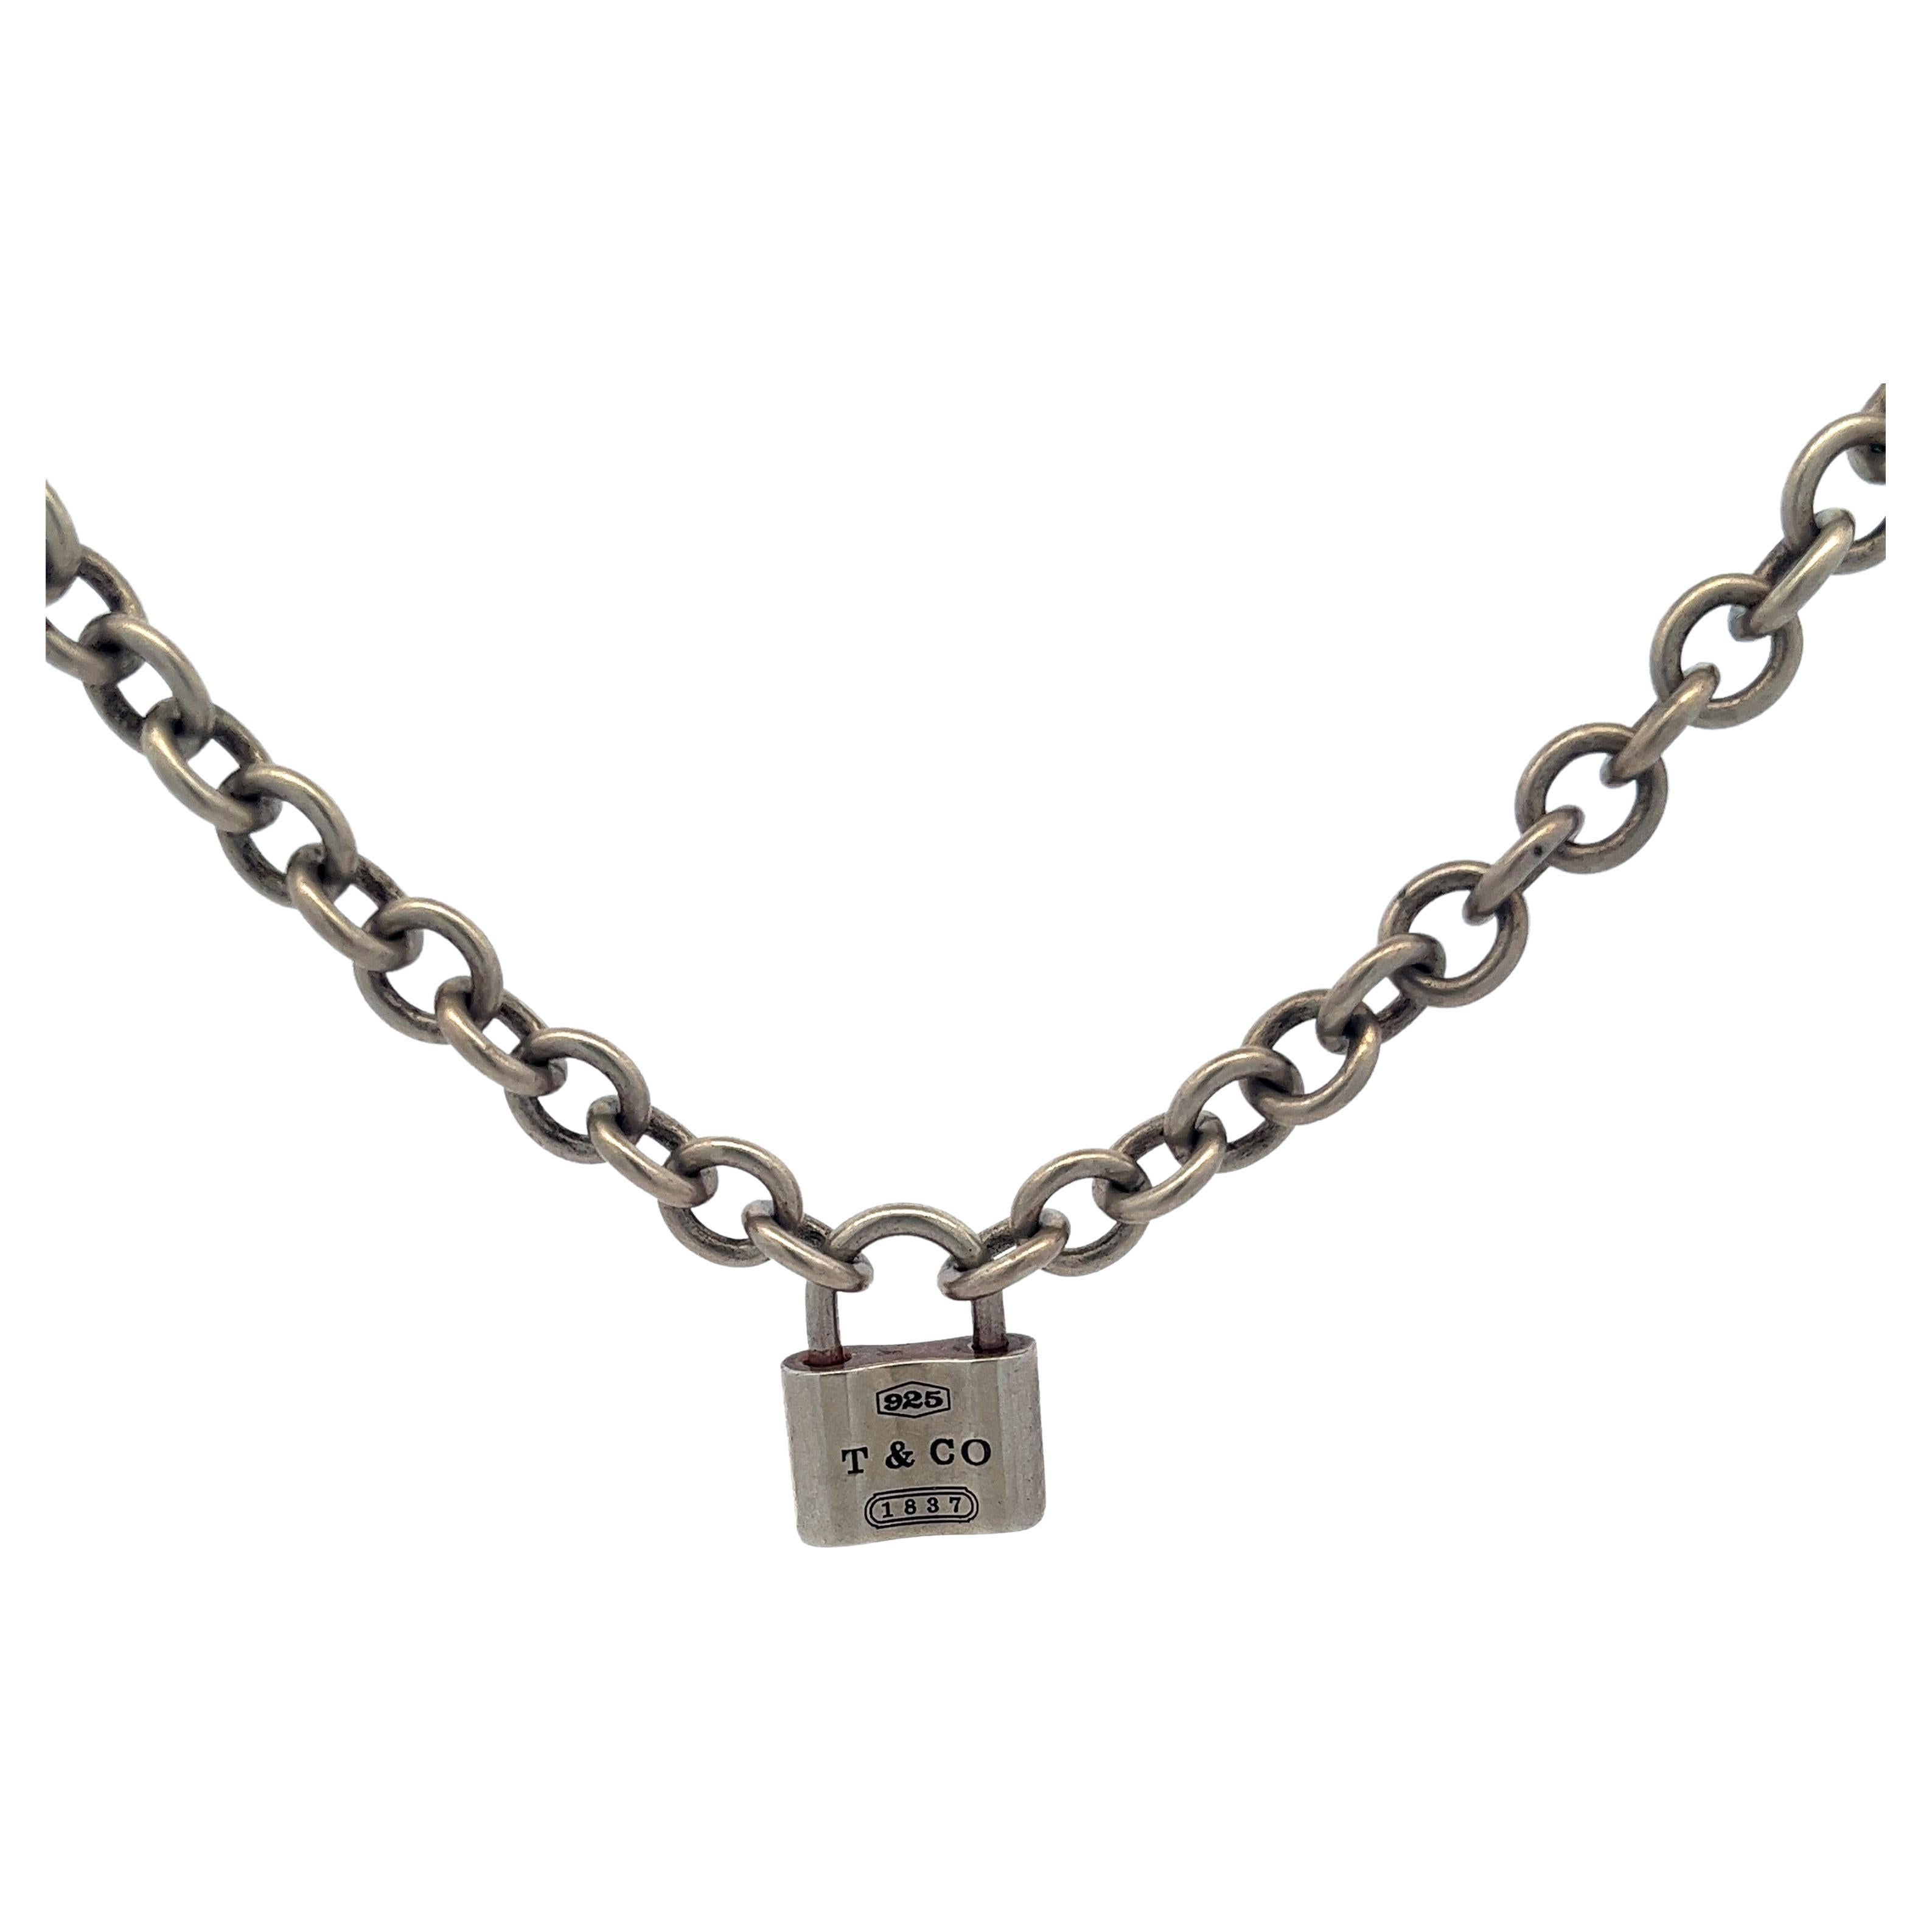 Tiffany and Co. Sterling Silver 1837 Lock Necklace